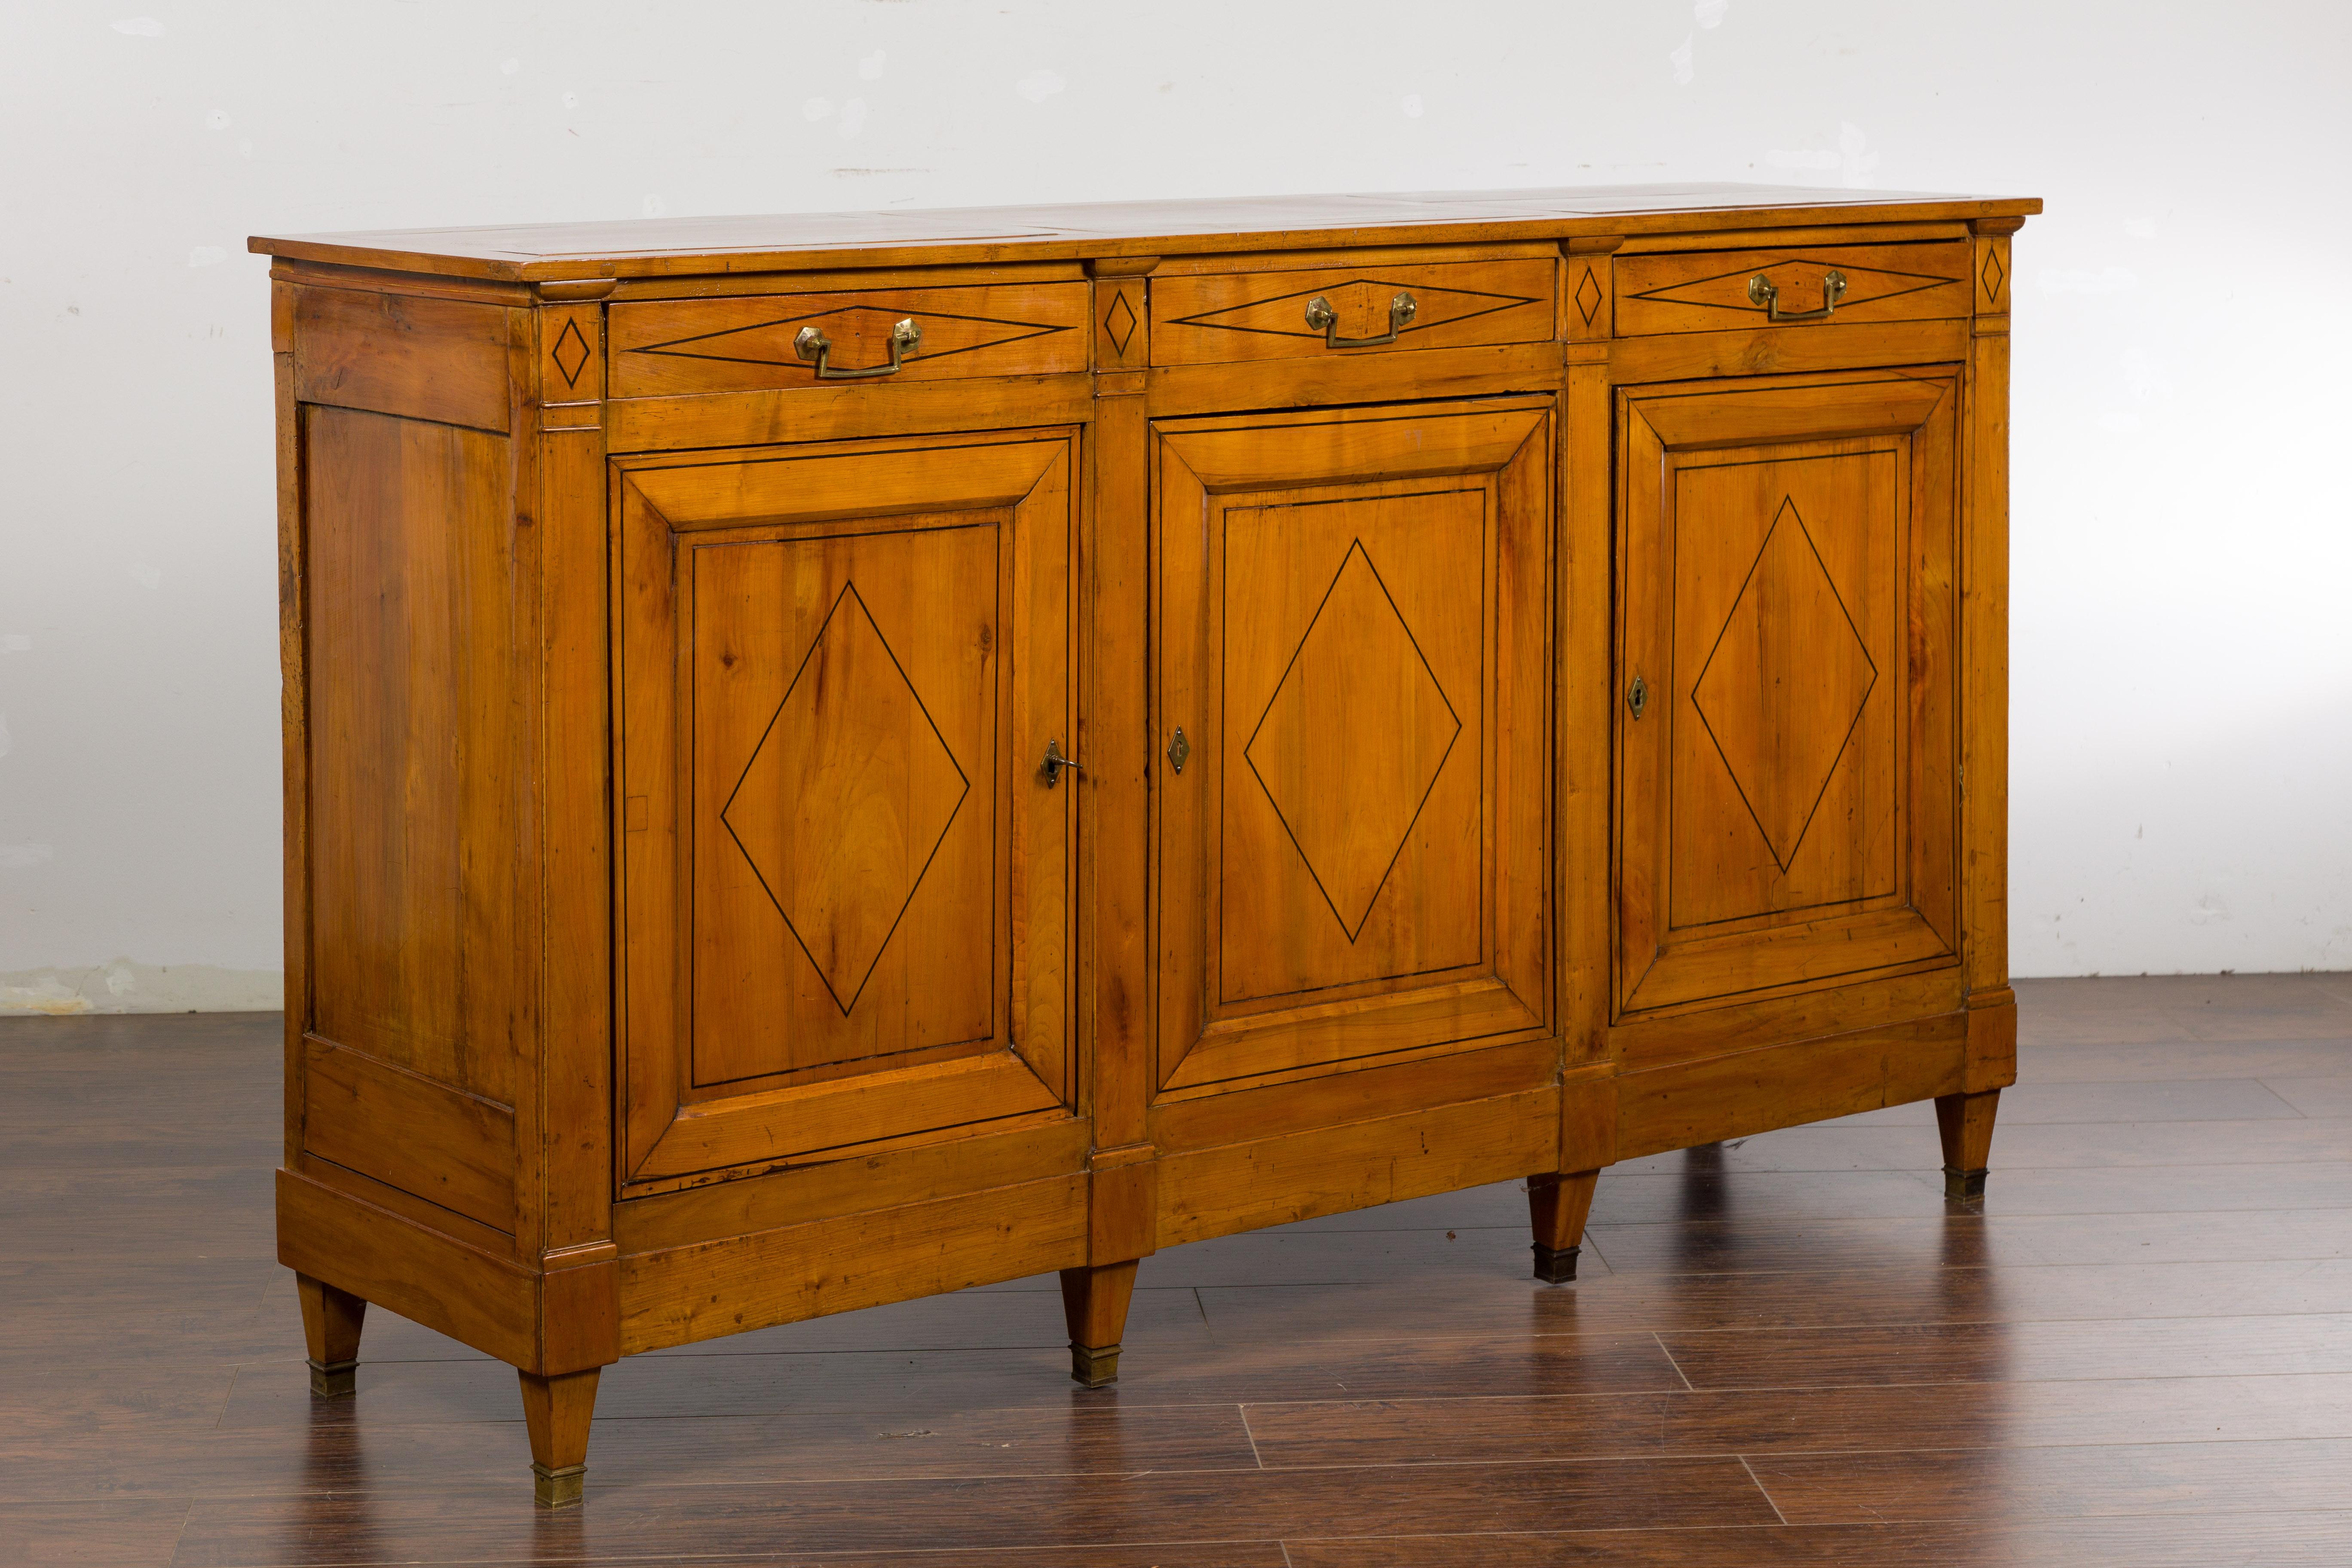 Inlay French 19th Century Walnut Enfilade with Three Drawers and Doors, Diamond Motifs For Sale